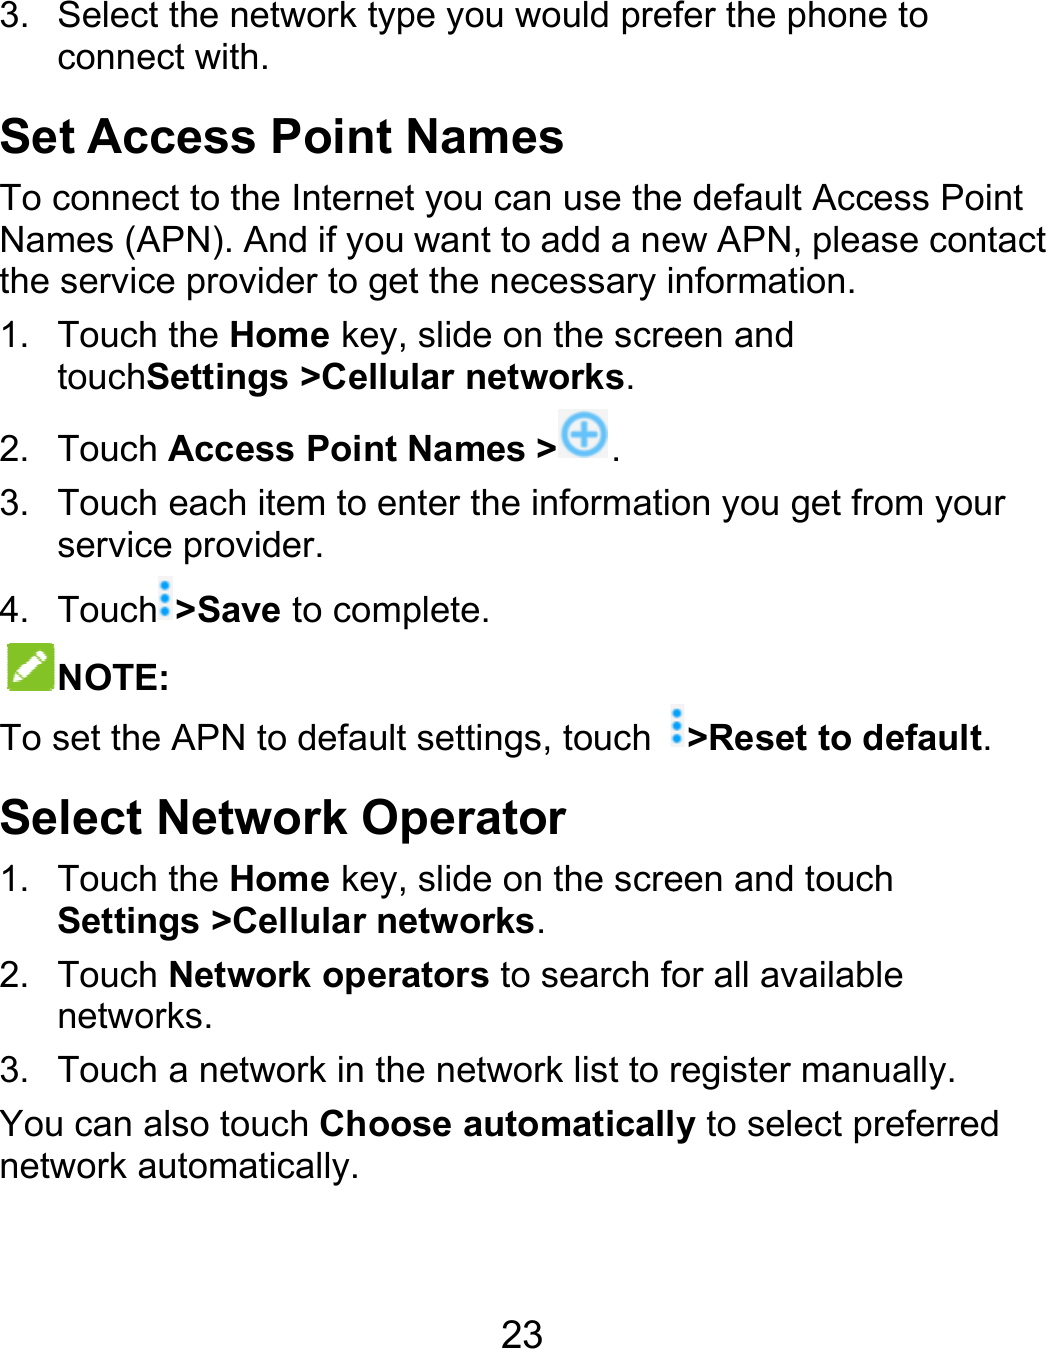  3. SelectconneSet AcTo conneNames (Athe servic1. TouchtouchS2. Touch3. Touchservic4. TouchNOTETo set theSelect 1. TouchSettin2. Touchnetwo3. TouchYou can anetwork at the network typect with. cess Point Nct to the InternetAPN). And if you ce provider to geth the Home key, Settings &gt;Celluh Access Point Nh each item to ence provider. h&gt;Save to compE: e APN to default Network Oph the Home key, ngs &gt;Cellular neh Network operaorks. h a network in thealso touch Chooautomatically. 23 pe you would preNames t you can use thewant to add a net the necessary islide on the screlar networks.Names &gt; . nter the informatioplete. settings, touch perator slide on the screetworks. ators to search foe network list to rse automaticallfer the phone to e default Access ew APN, please cnformation. een and on you get from &gt;Reset to defaeen and touch or all available register manuallyly to select prefePoint contact your ault. y. rred 